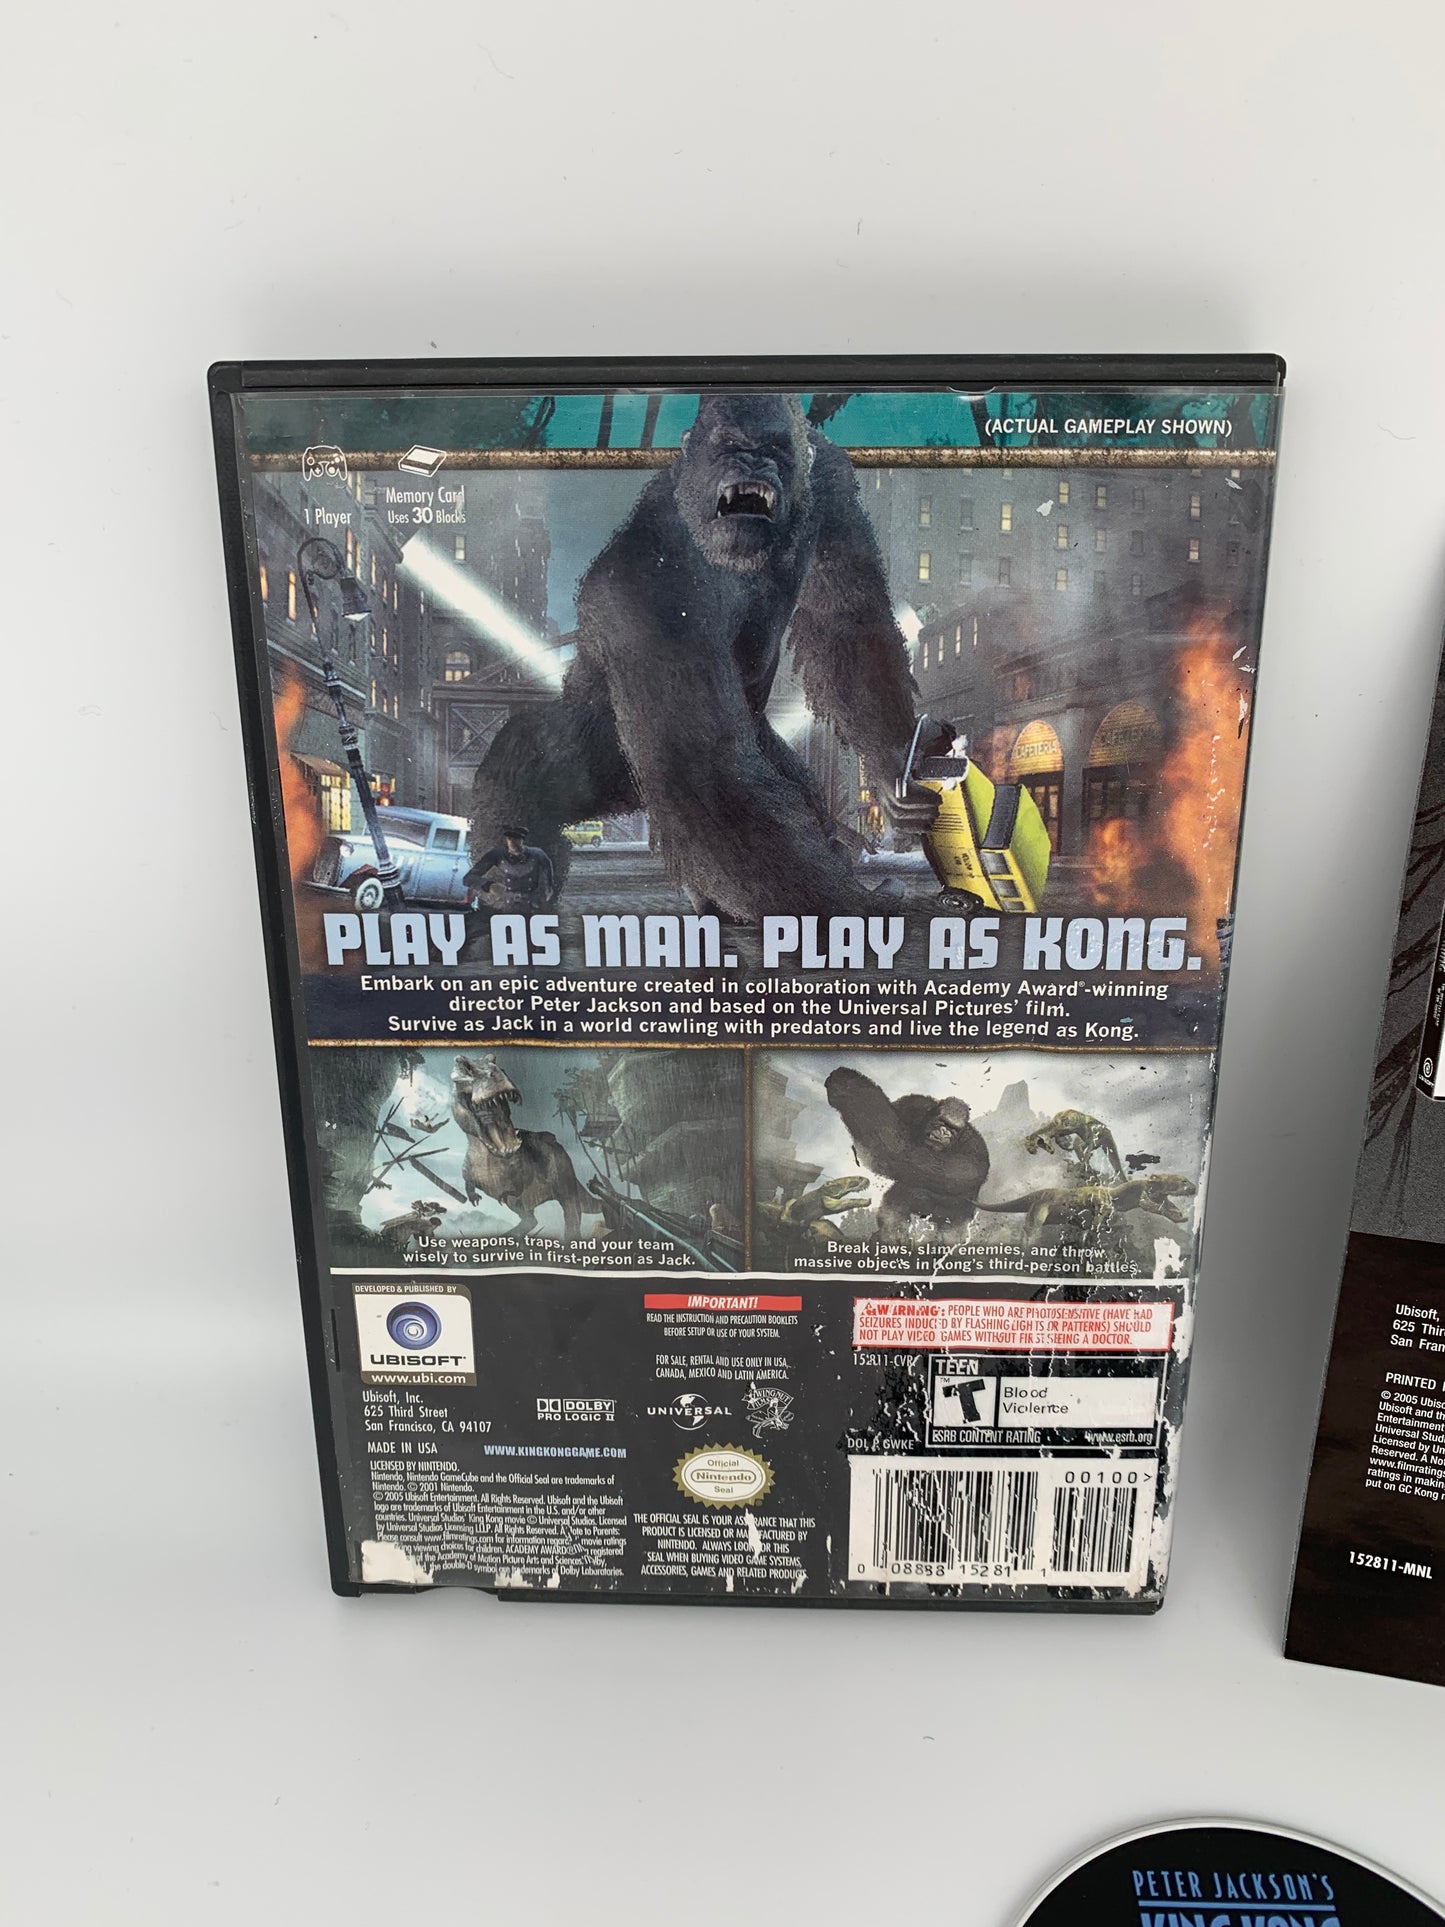 NiNTENDO GAMECUBE [NGC] | PETER JACKSONS KiNG KONG THE OFFiCiAL GAME OF THE MOViE